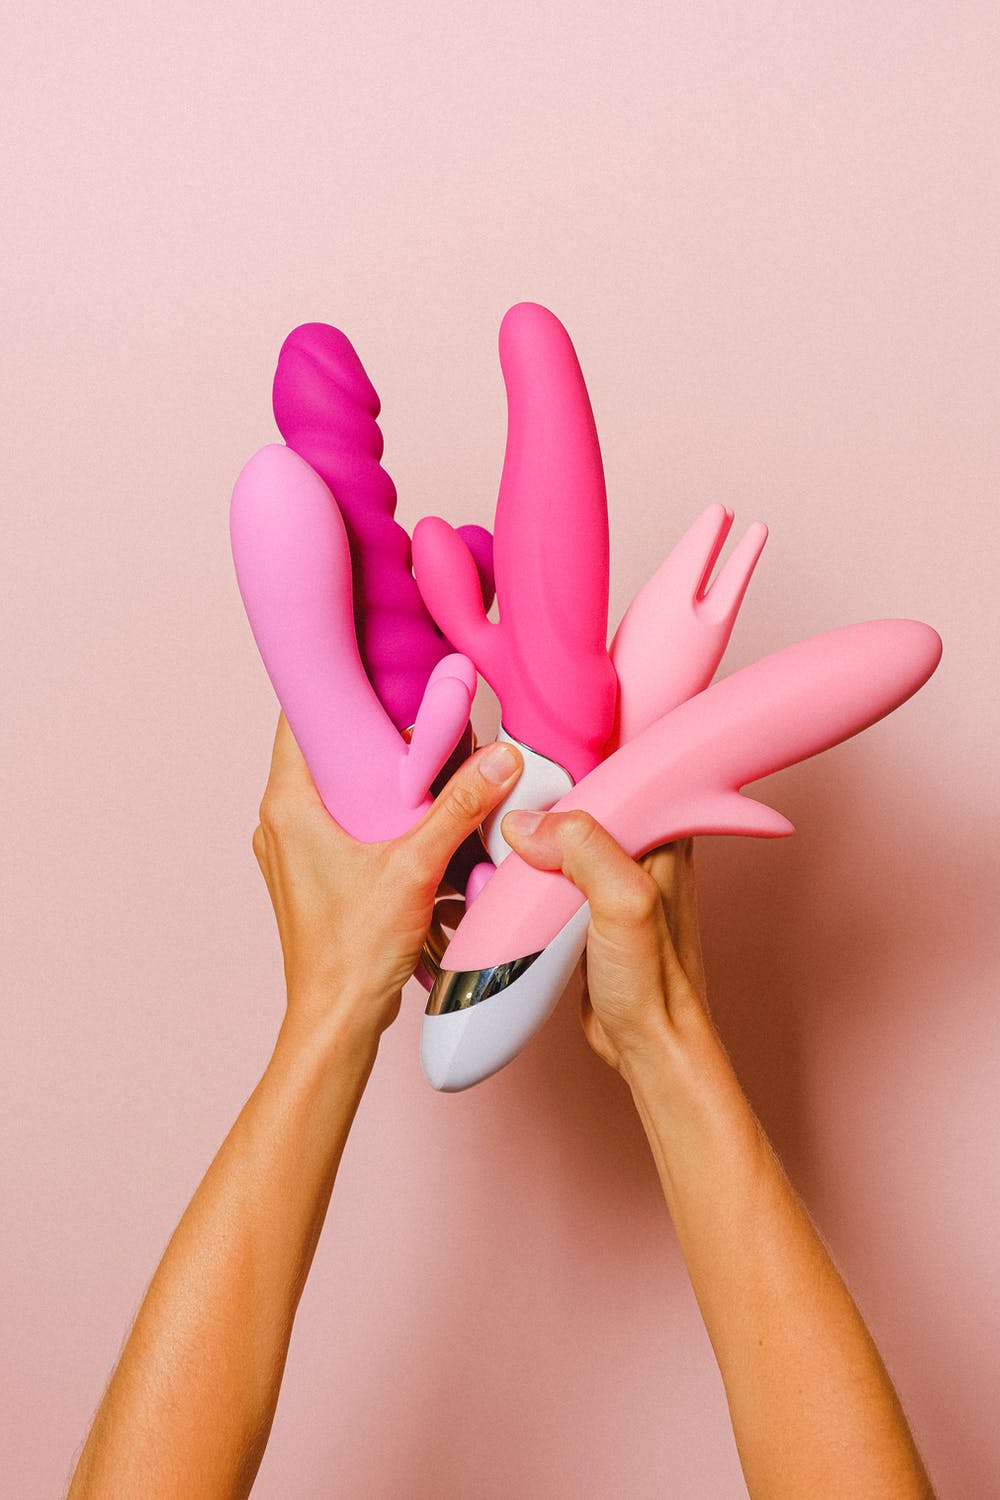 Is it weird to give your friend a sex toy as a gift?